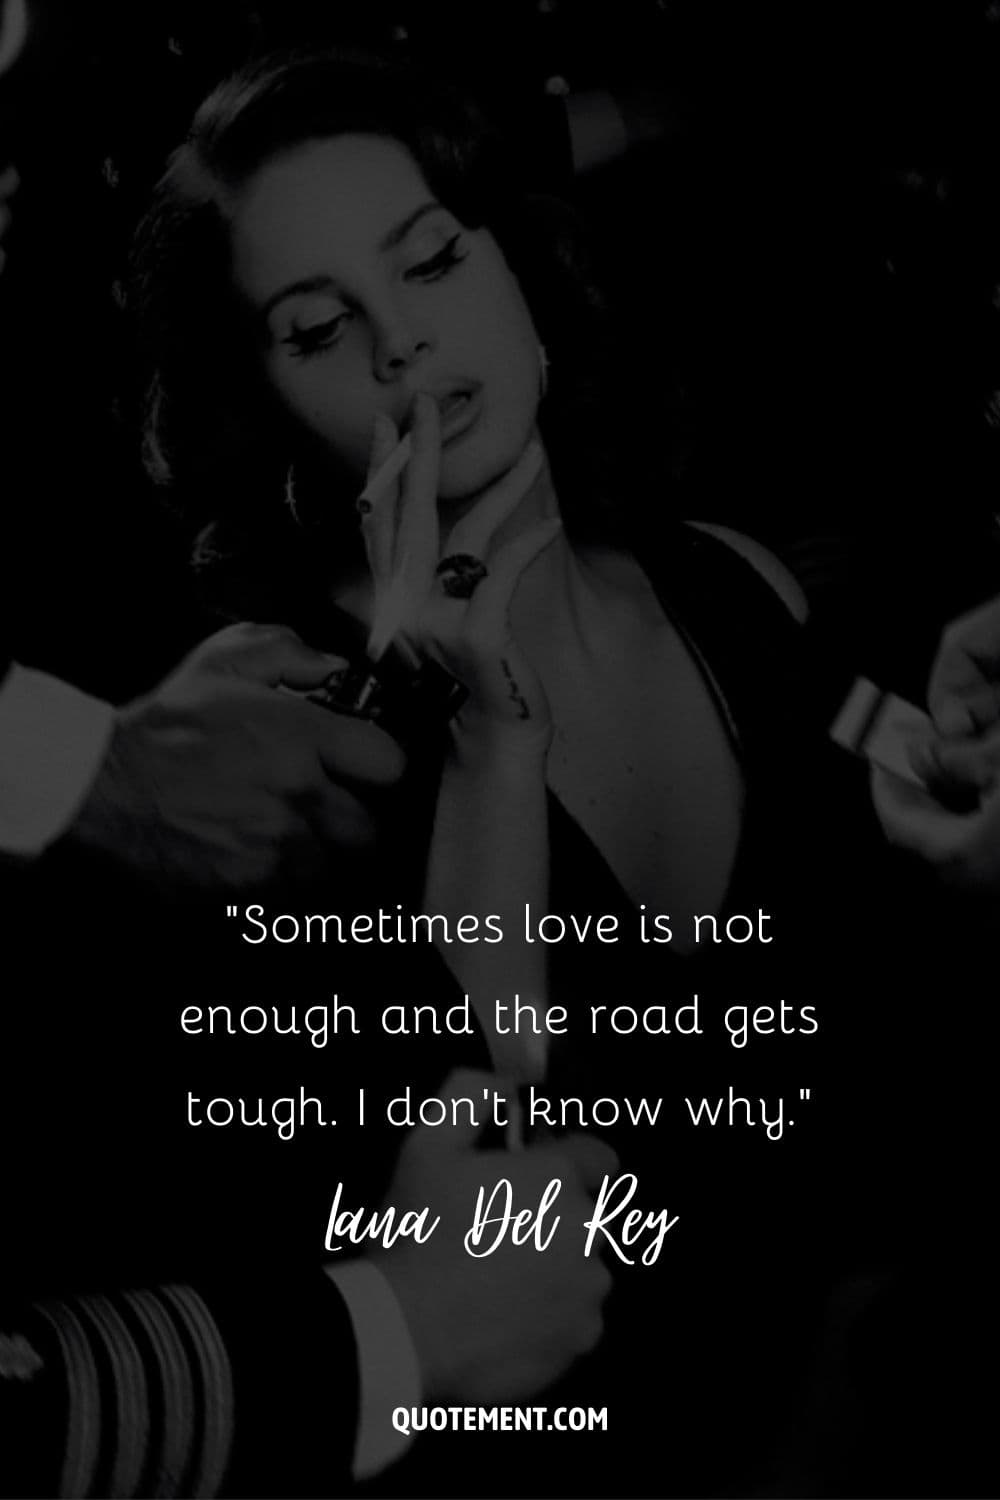 Sometimes love is not enough and the road gets tough. I don’t know why